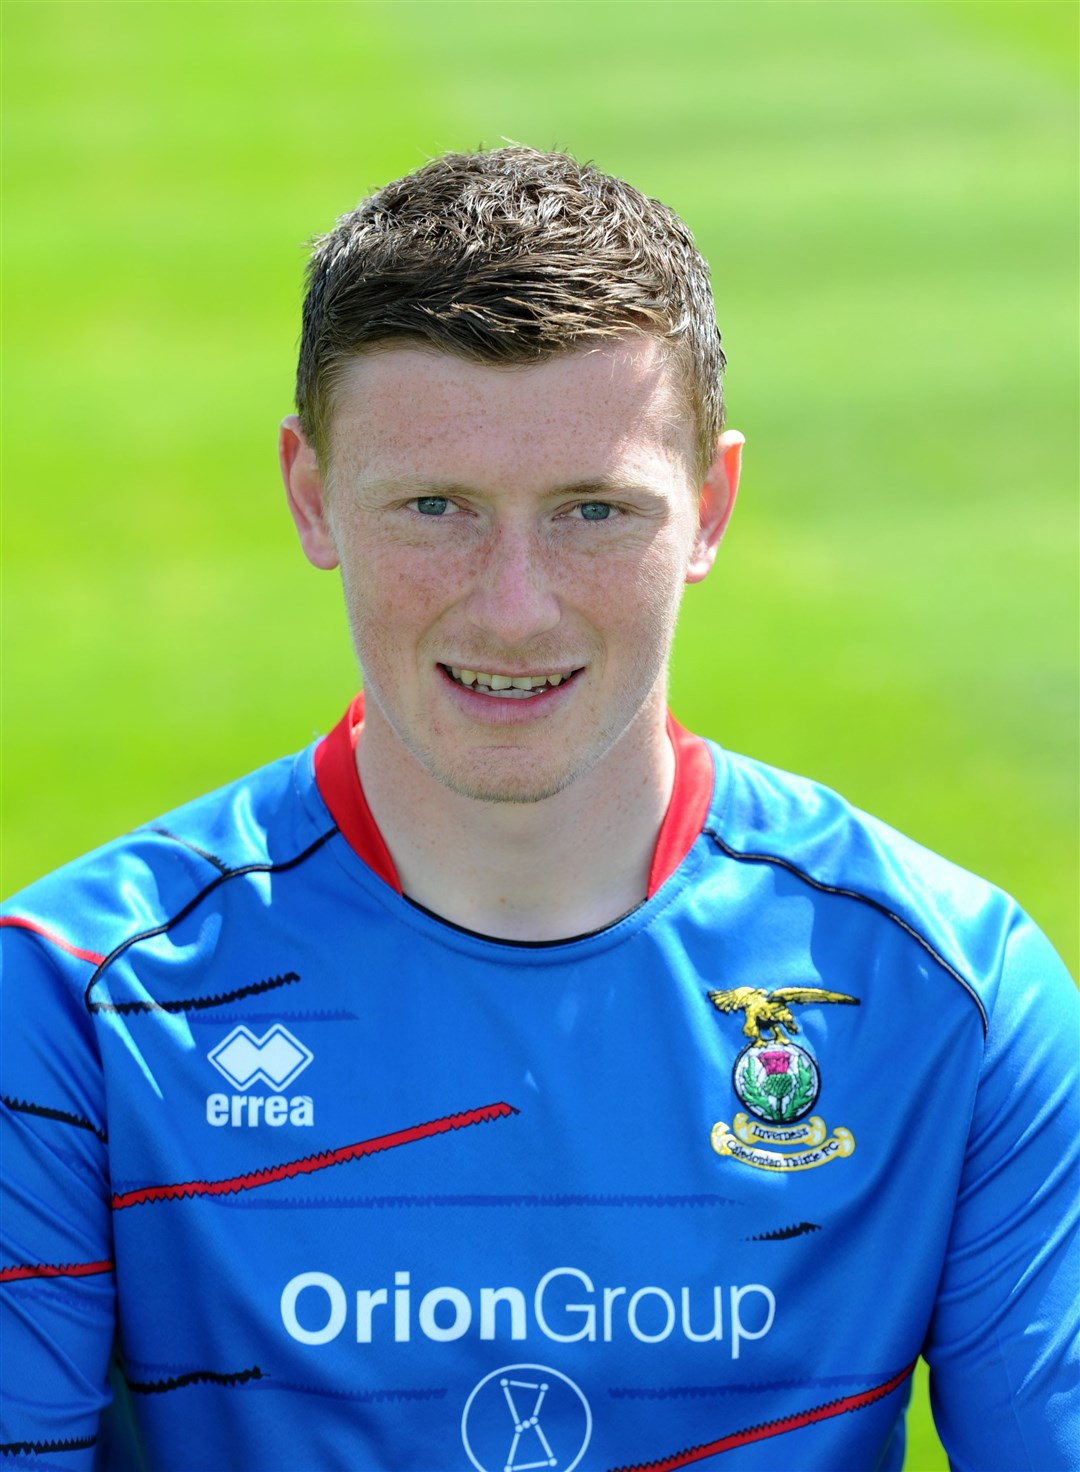 Getting ready for the 2012-13 season, the last year Shane Sutherland was at Caley Thistle.Photo: Gary Anthony.